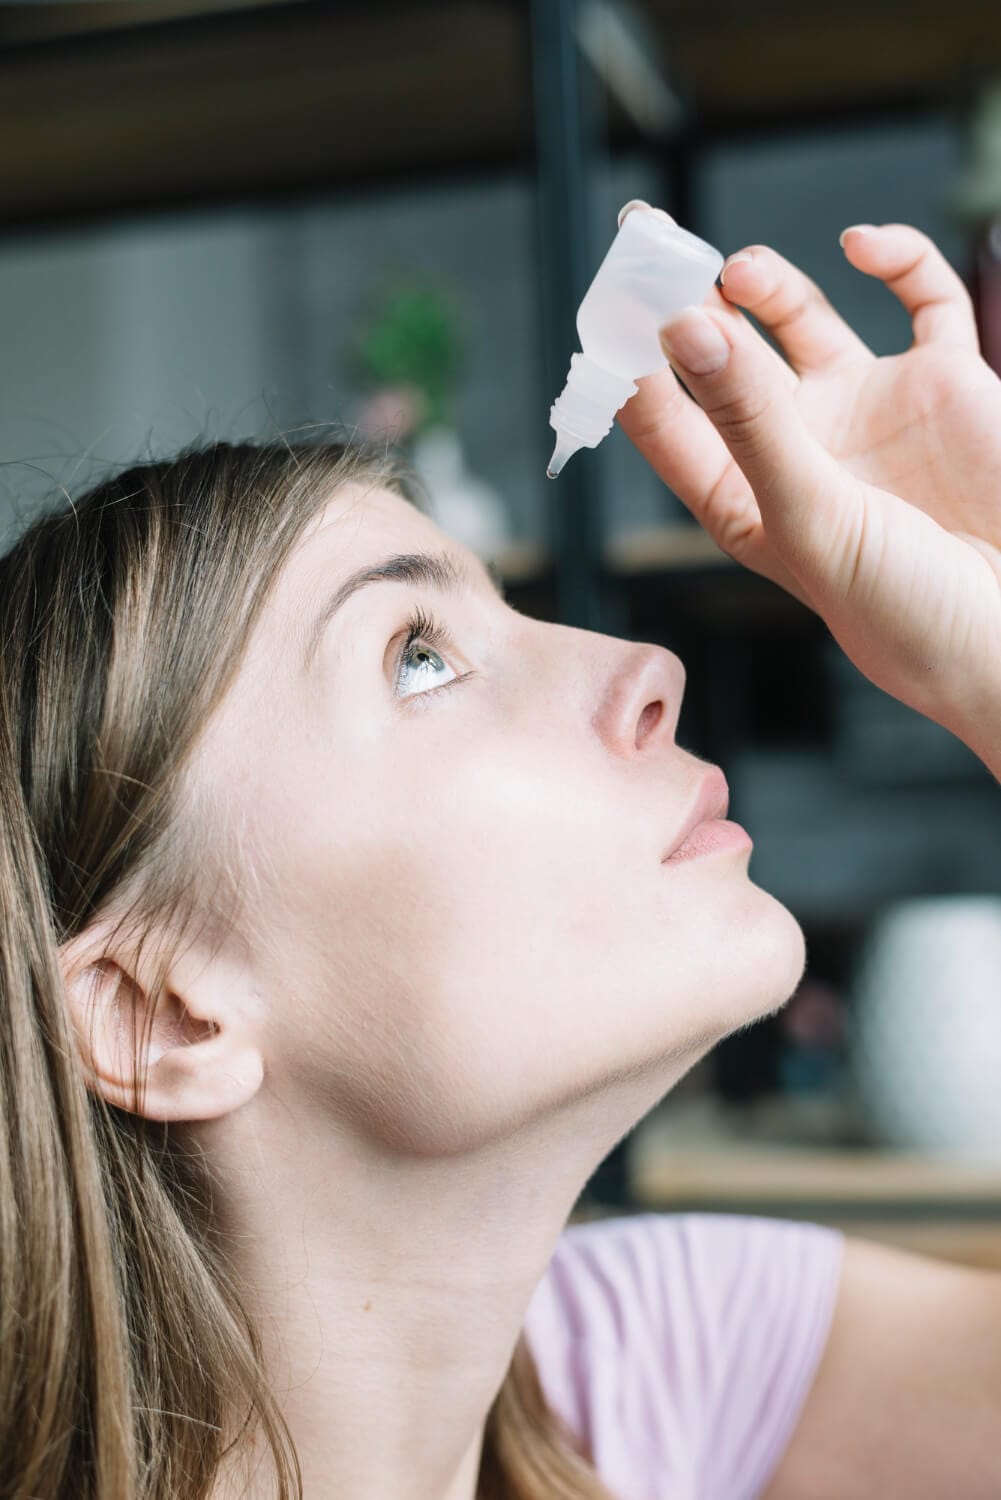 How Can I Relieve Contact Lens-Induced Dry-Eye?